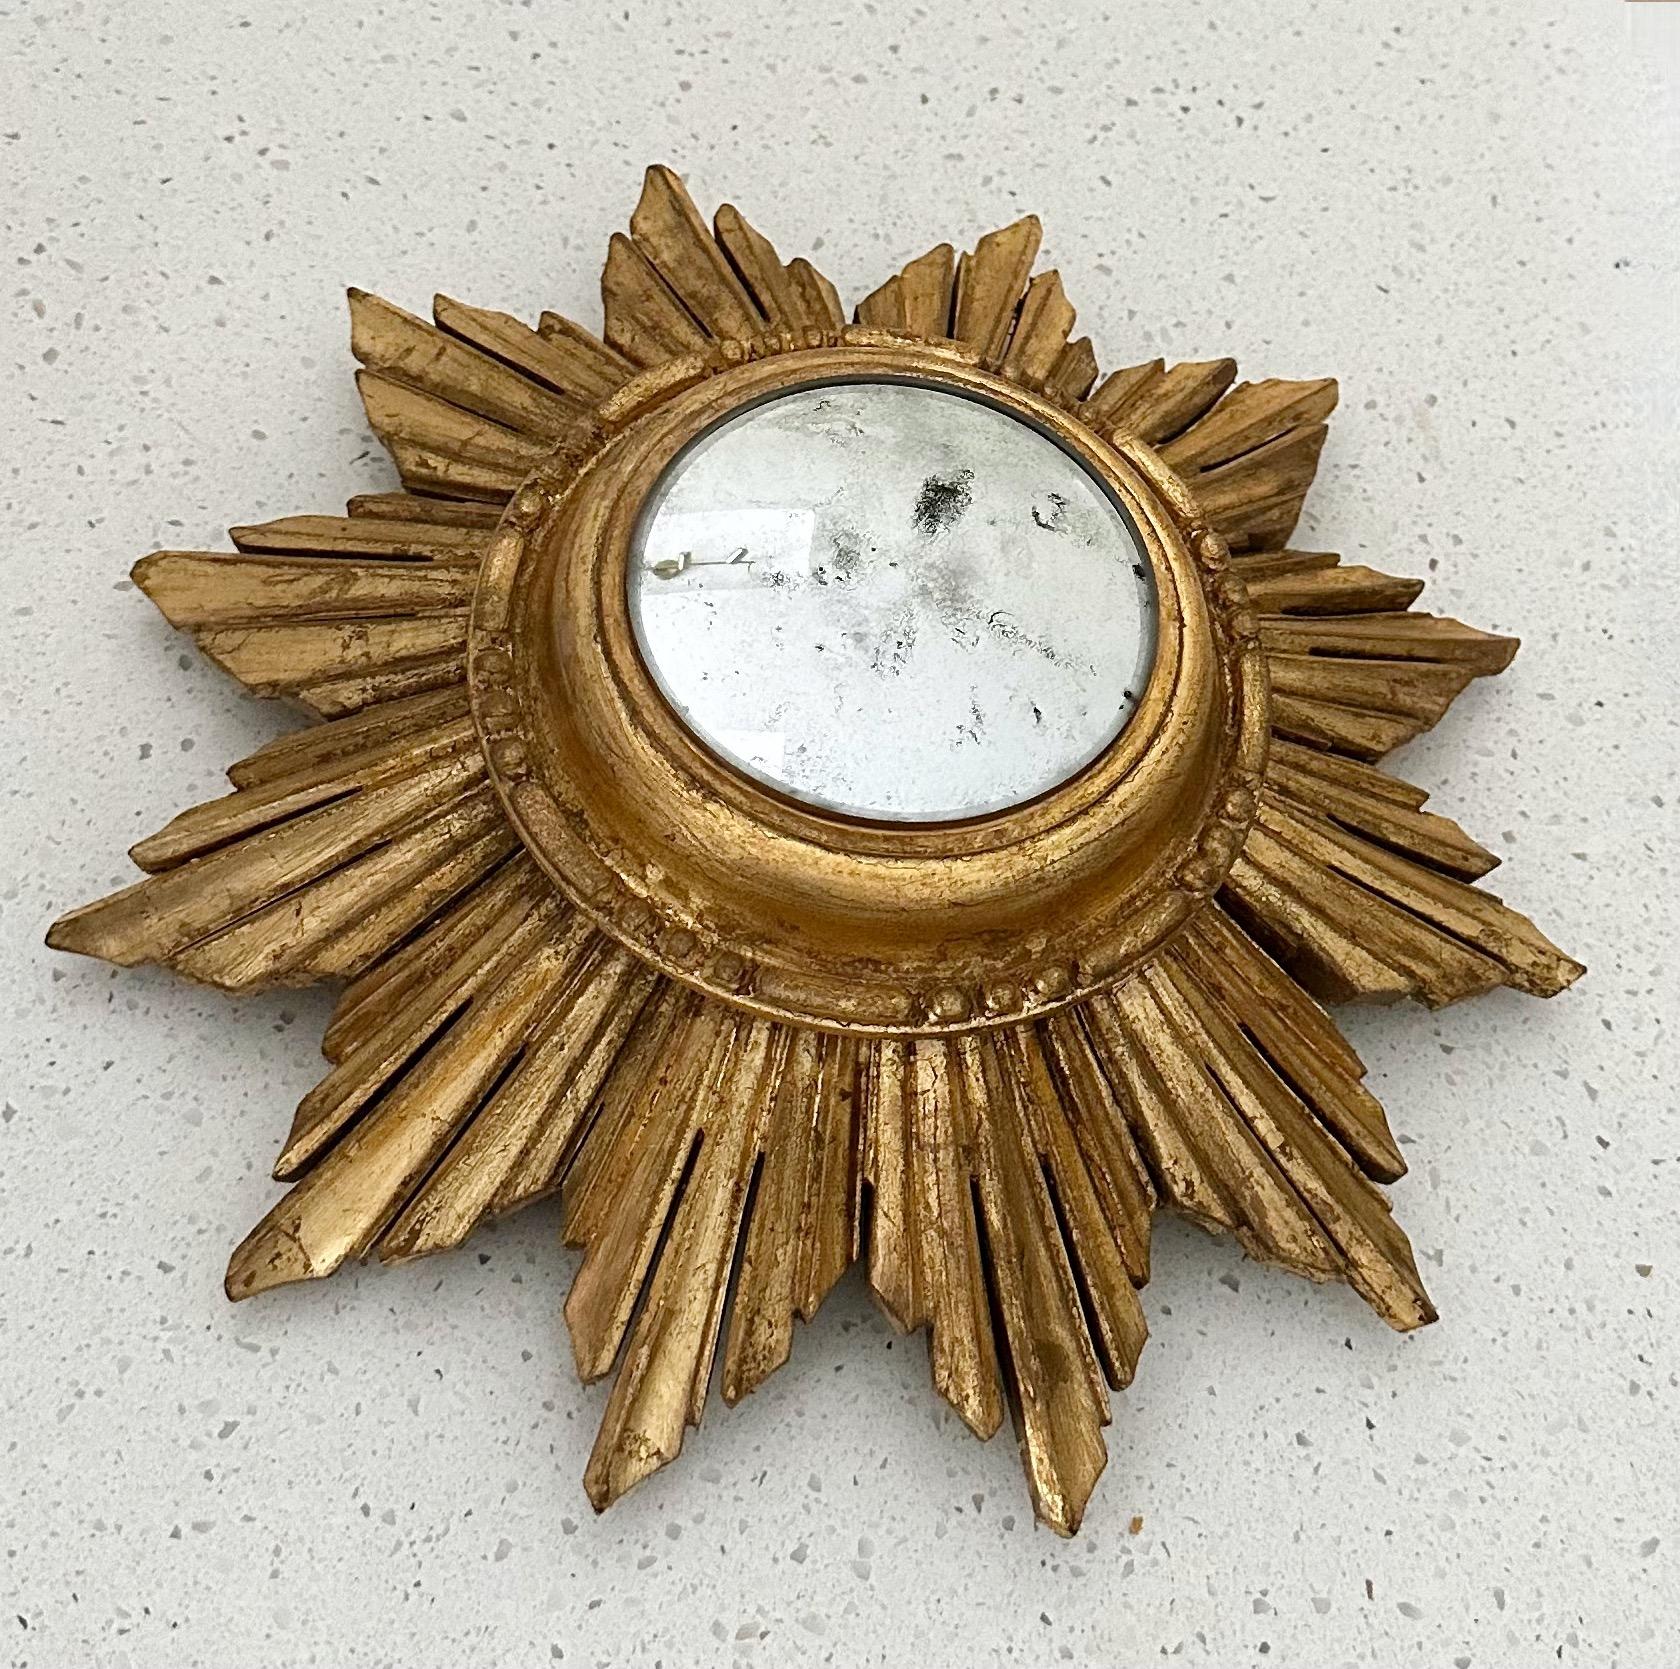 Smaller scale giltwood sunburst (starburst) convex wall mirror. Formally a clock convert to wall mirror with newer aged to look older convex mirror.  Overall size mirror 12